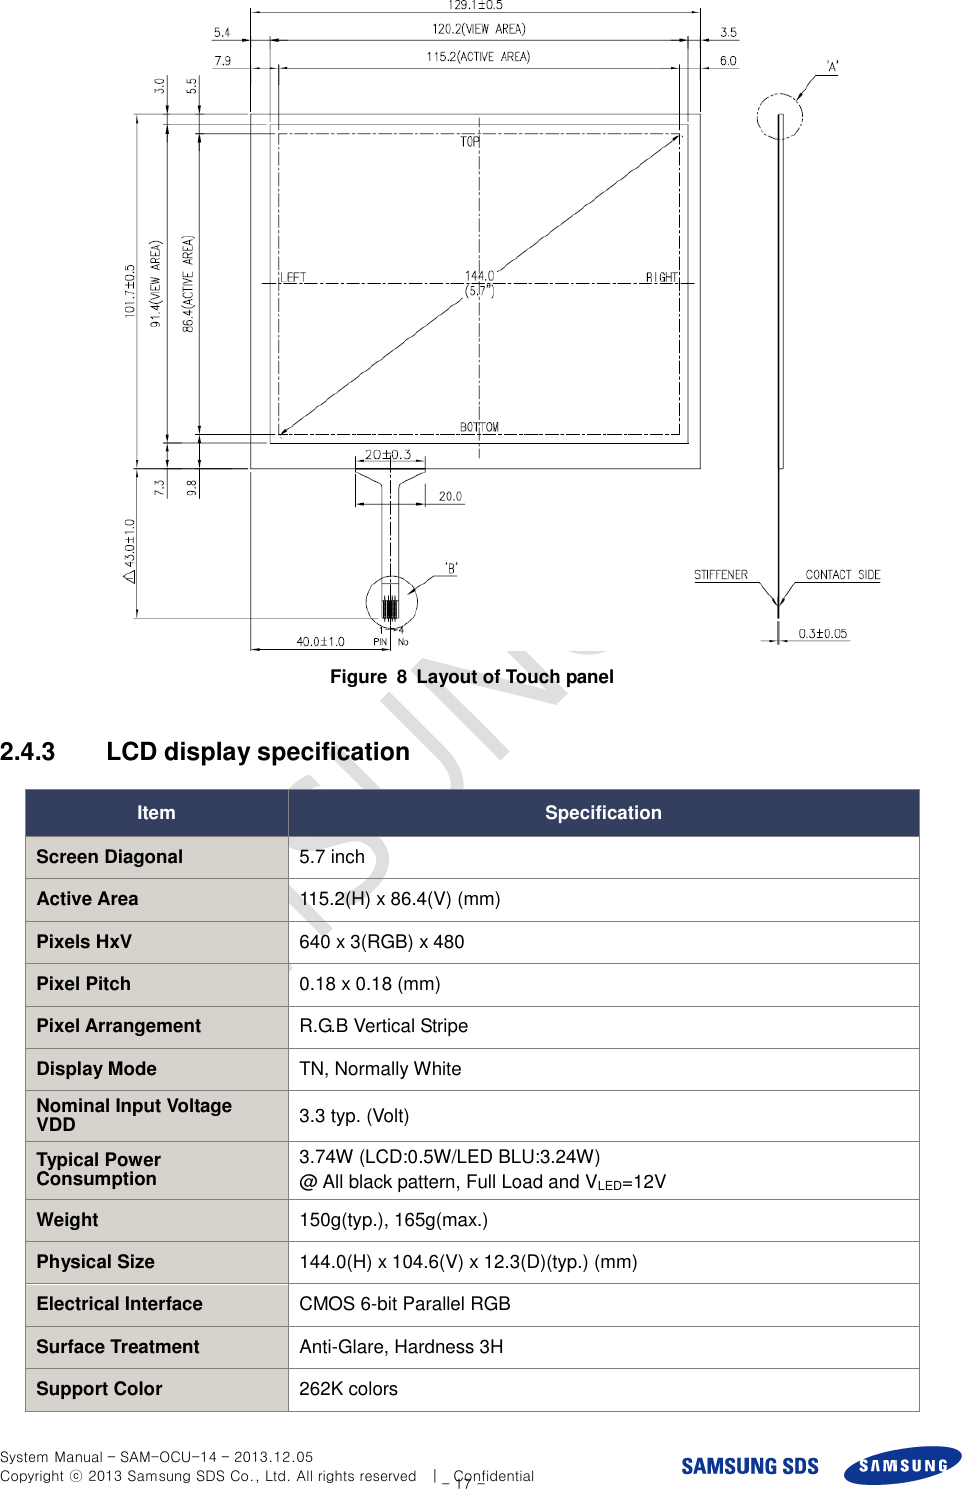  System Manual – SAM-OCU-14 – 2013.12.05 Copyright ⓒ 2013 Samsung SDS Co., Ltd. All rights reserved    |    Confidential - 17 -  Figure  8  Layout of Touch panel  2.4.3  LCD display specification Item Specification Screen Diagonal 5.7 inch Active Area 115.2(H) x 86.4(V) (mm) Pixels HxV 640 x 3(RGB) x 480 Pixel Pitch 0.18 x 0.18 (mm) Pixel Arrangement R.G.B Vertical Stripe Display Mode TN, Normally White Nominal Input Voltage VDD 3.3 typ. (Volt) Typical Power Consumption 3.74W (LCD:0.5W/LED BLU:3.24W) @ All black pattern, Full Load and VLED=12V Weight 150g(typ.), 165g(max.) Physical Size 144.0(H) x 104.6(V) x 12.3(D)(typ.) (mm) Electrical Interface CMOS 6-bit Parallel RGB Surface Treatment Anti-Glare, Hardness 3H Support Color 262K colors 